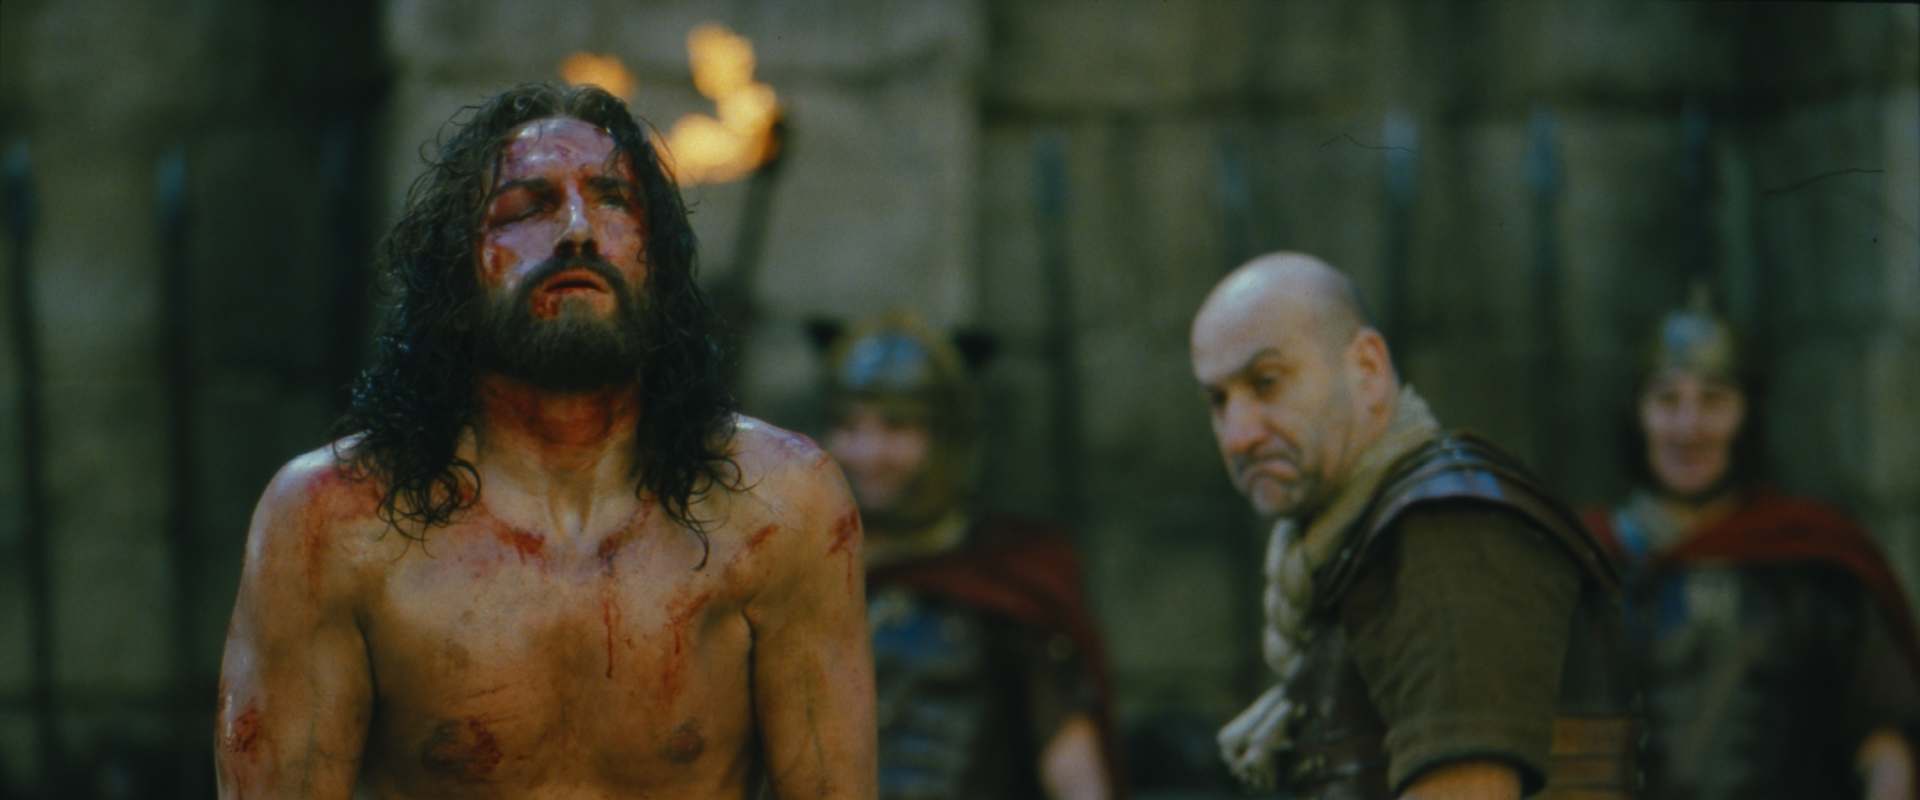 Passion of the christ full movie free